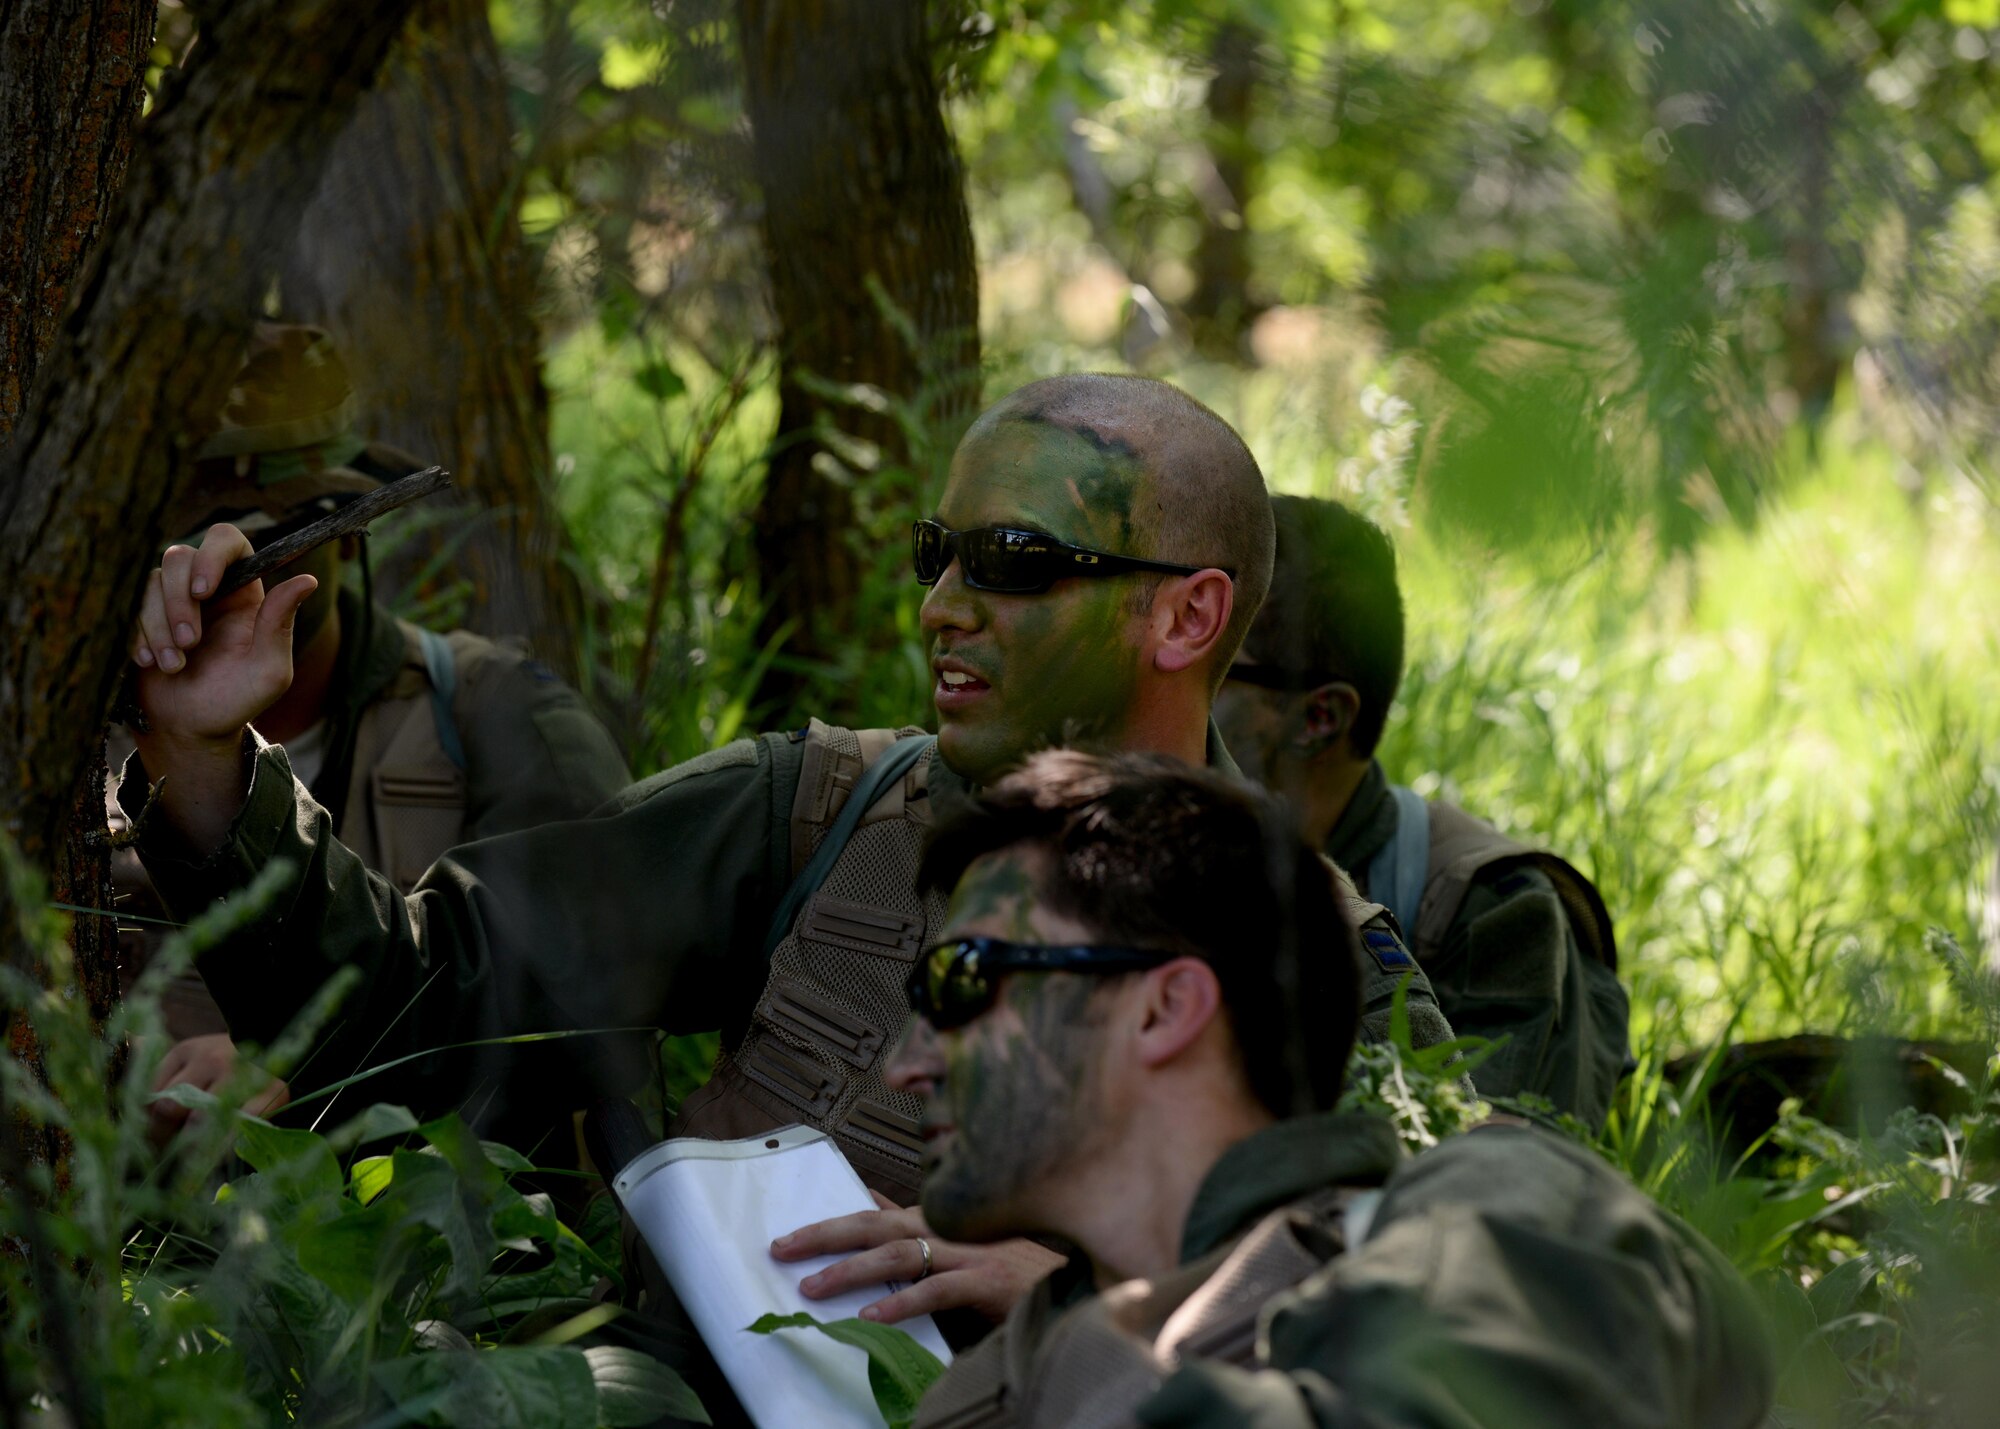 Capts. Korey Schultz, 37th Bomb Squadron weapons system officer, center back, and Matthew Dickerson, center front, 37th BS pilot, hide from simulated enemy forces during Survival, Evasion, Resistance and Escape training near Fort Meade, S.D., June 21, 2016. During the training, several Airmen posed as enemy forces with a goal of detecting the aircrew during their movement to a safe area. (U.S. Air Force photo by Senior Airman Rebecca Imwalle/Released)